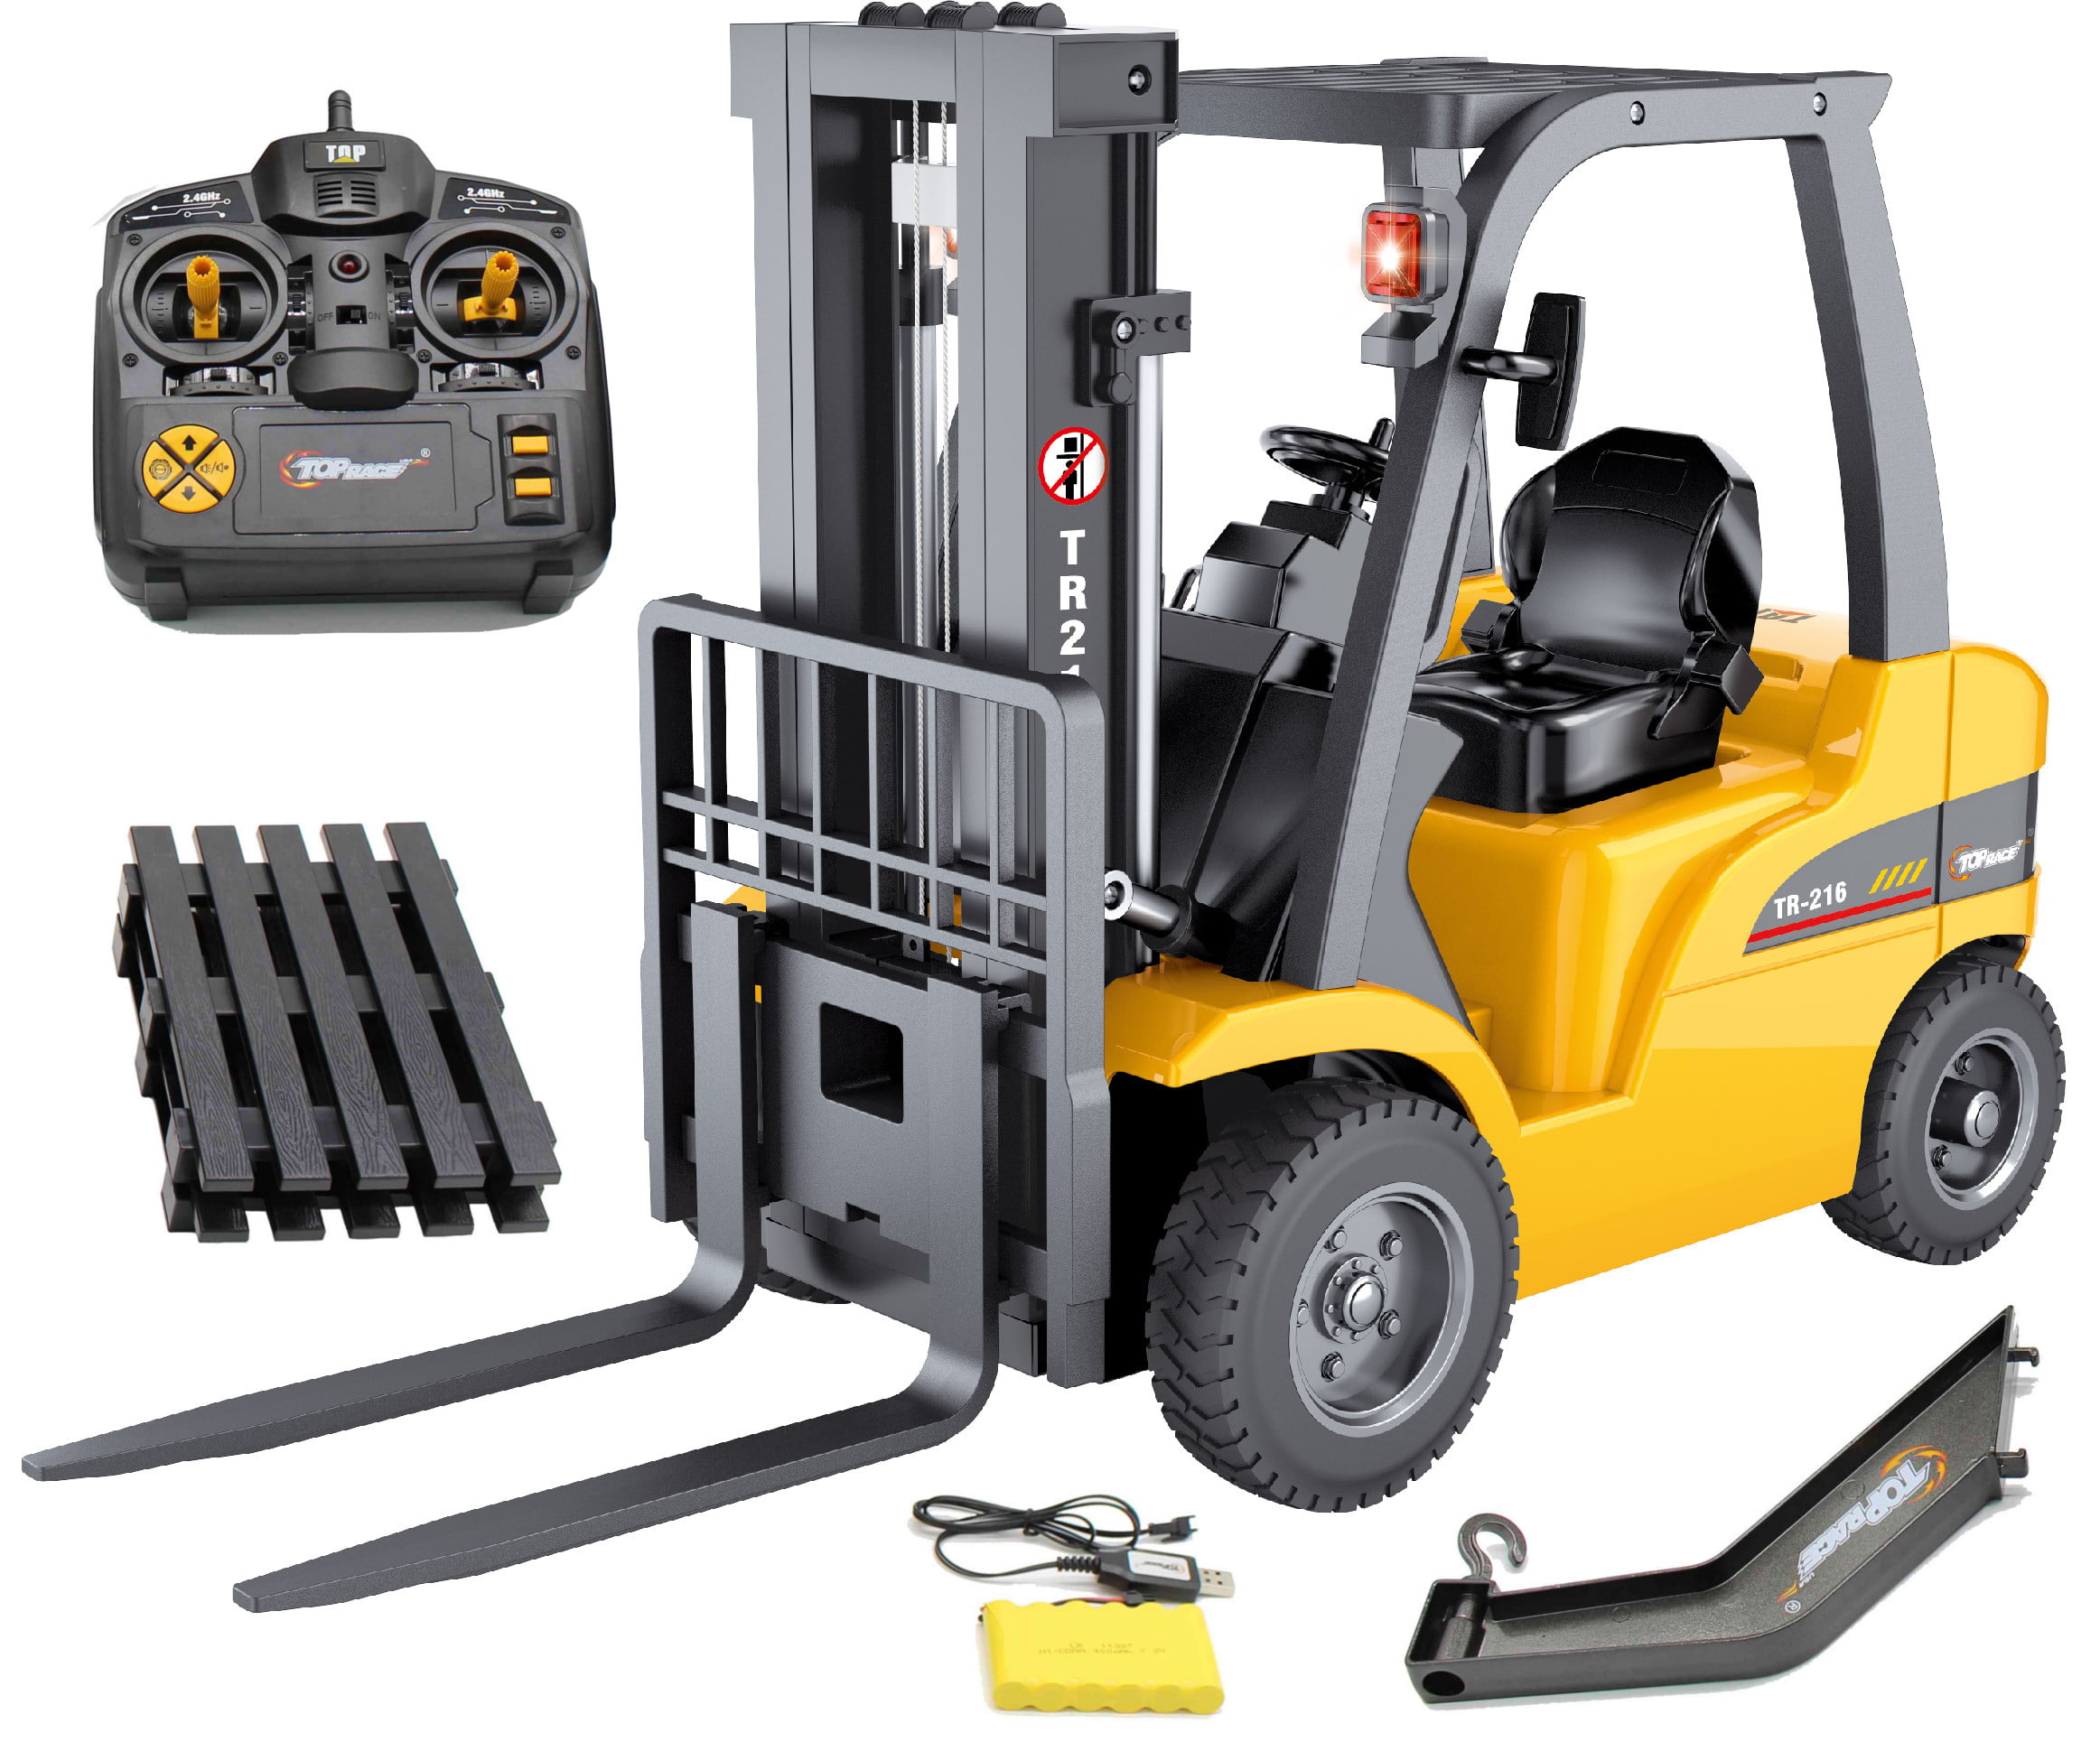 Top Race JUMBO Remote control forklift 13 Inch Tall, 8 Channel Full  Functional Professional RC Forklift Construction Toys, High Powered Motors,  1:10 